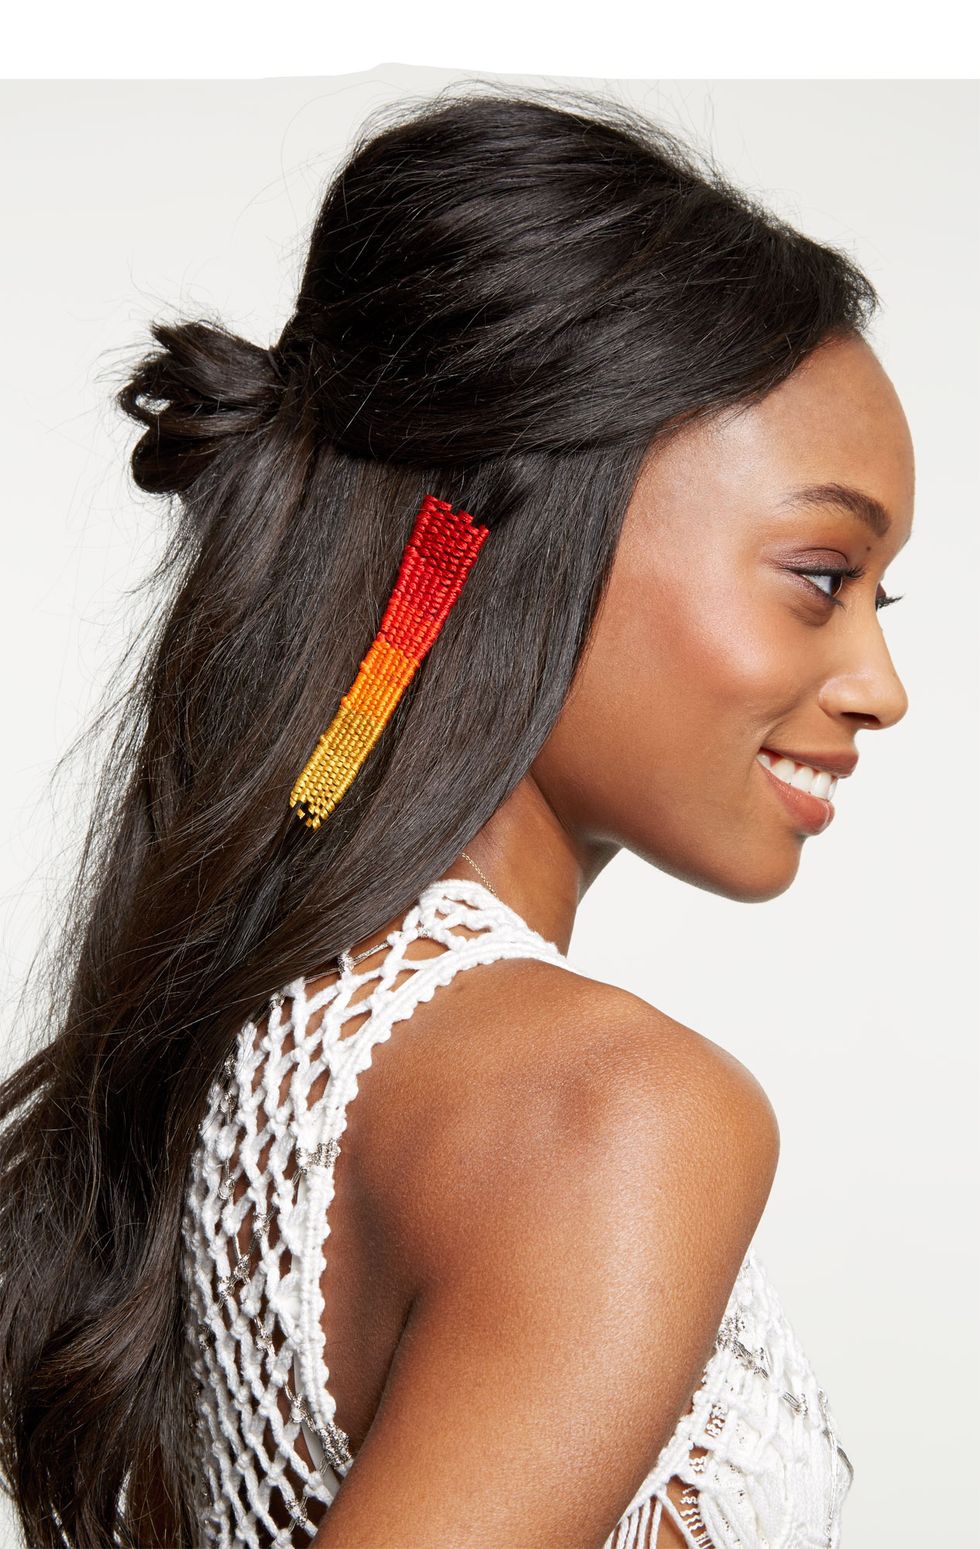 Hair Accessories You Would Love to Wear Every Day